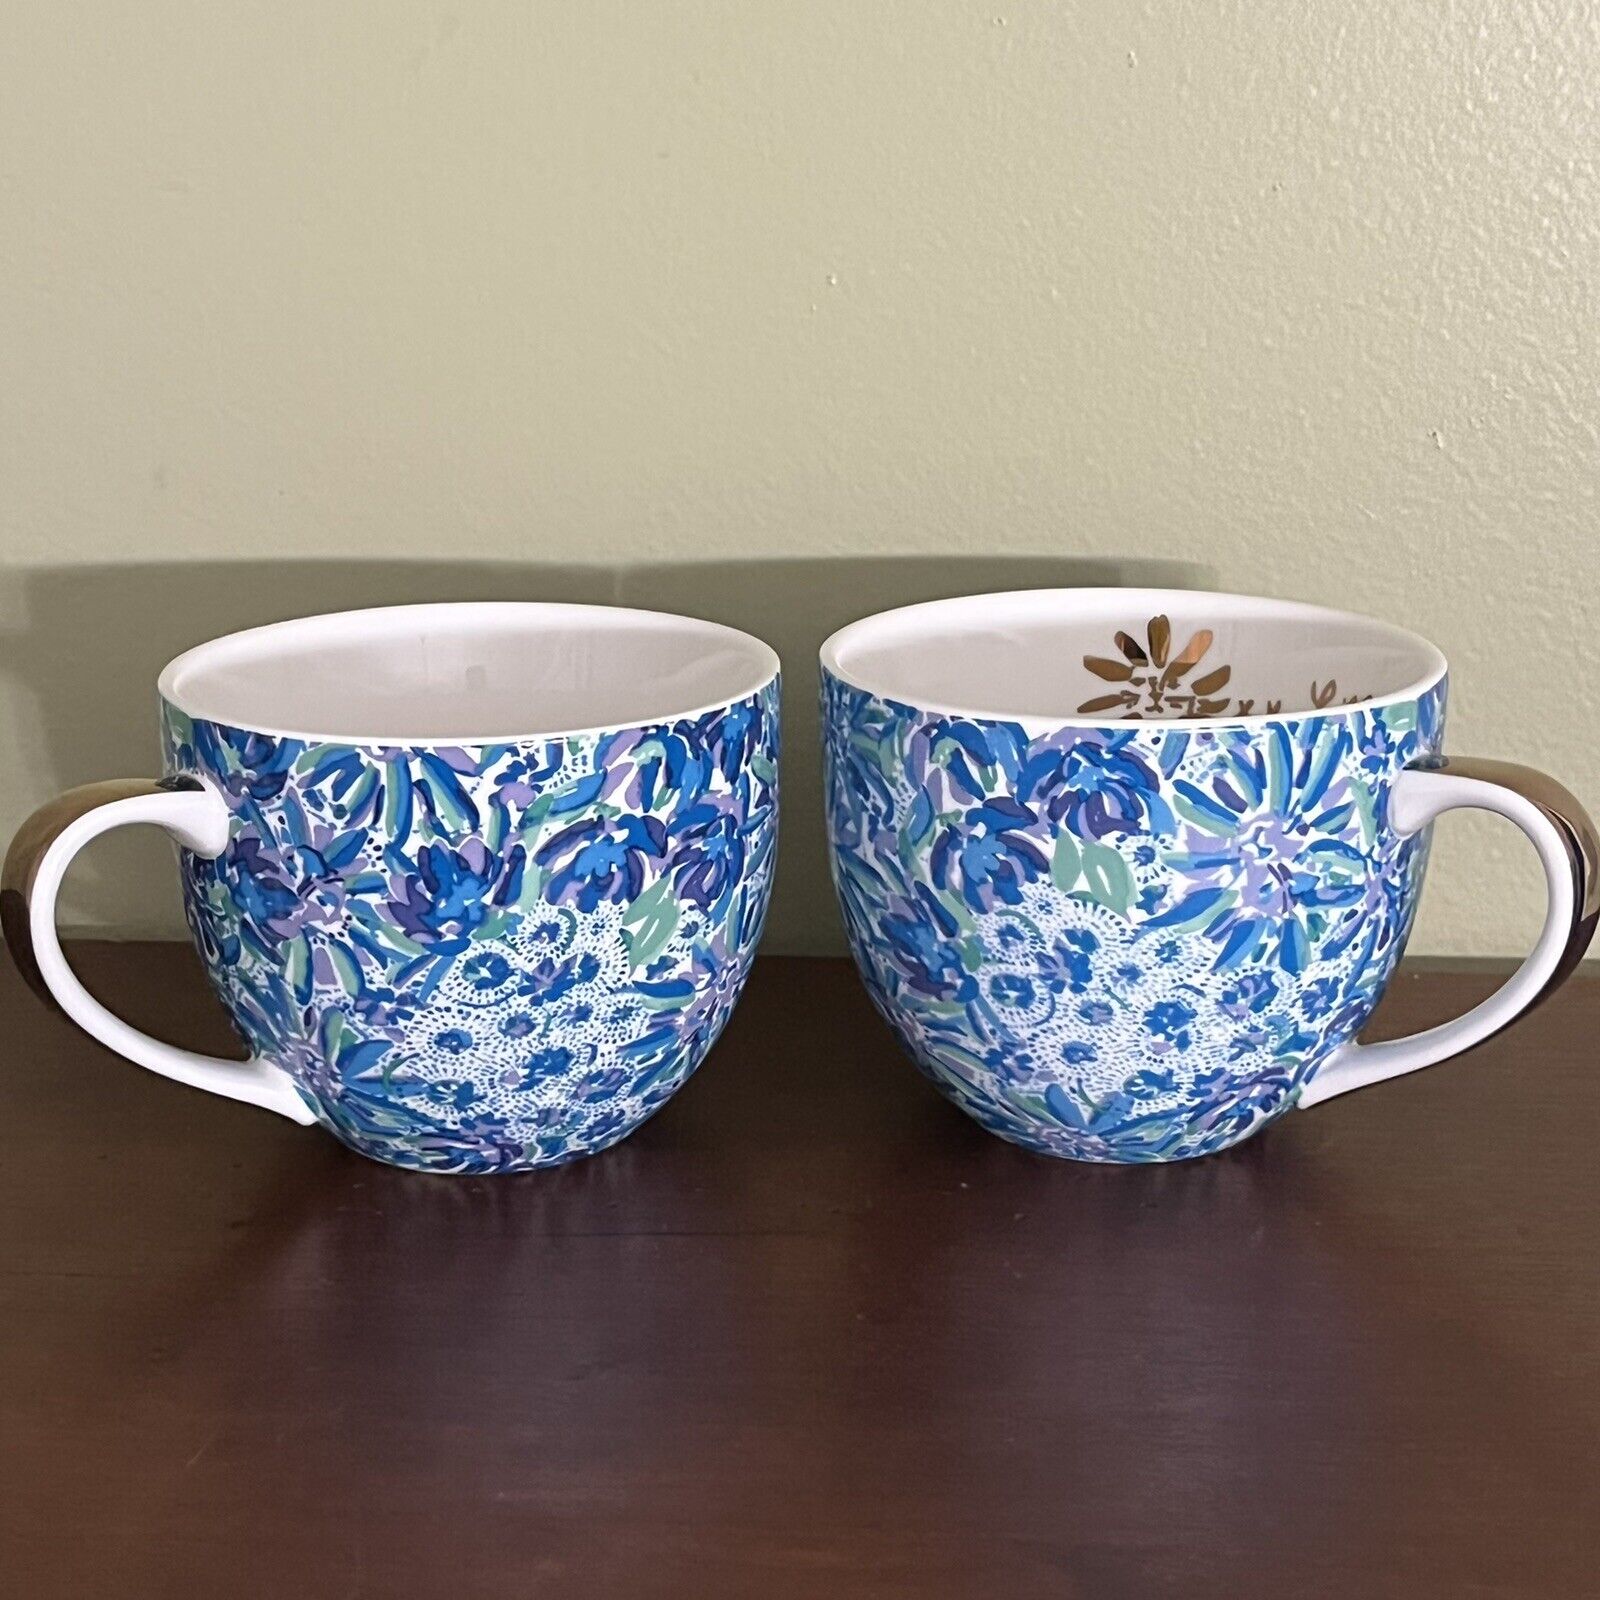 Lovely Pair Of Lilly Pulitzer Cups Mugs Floral Tea Coffee